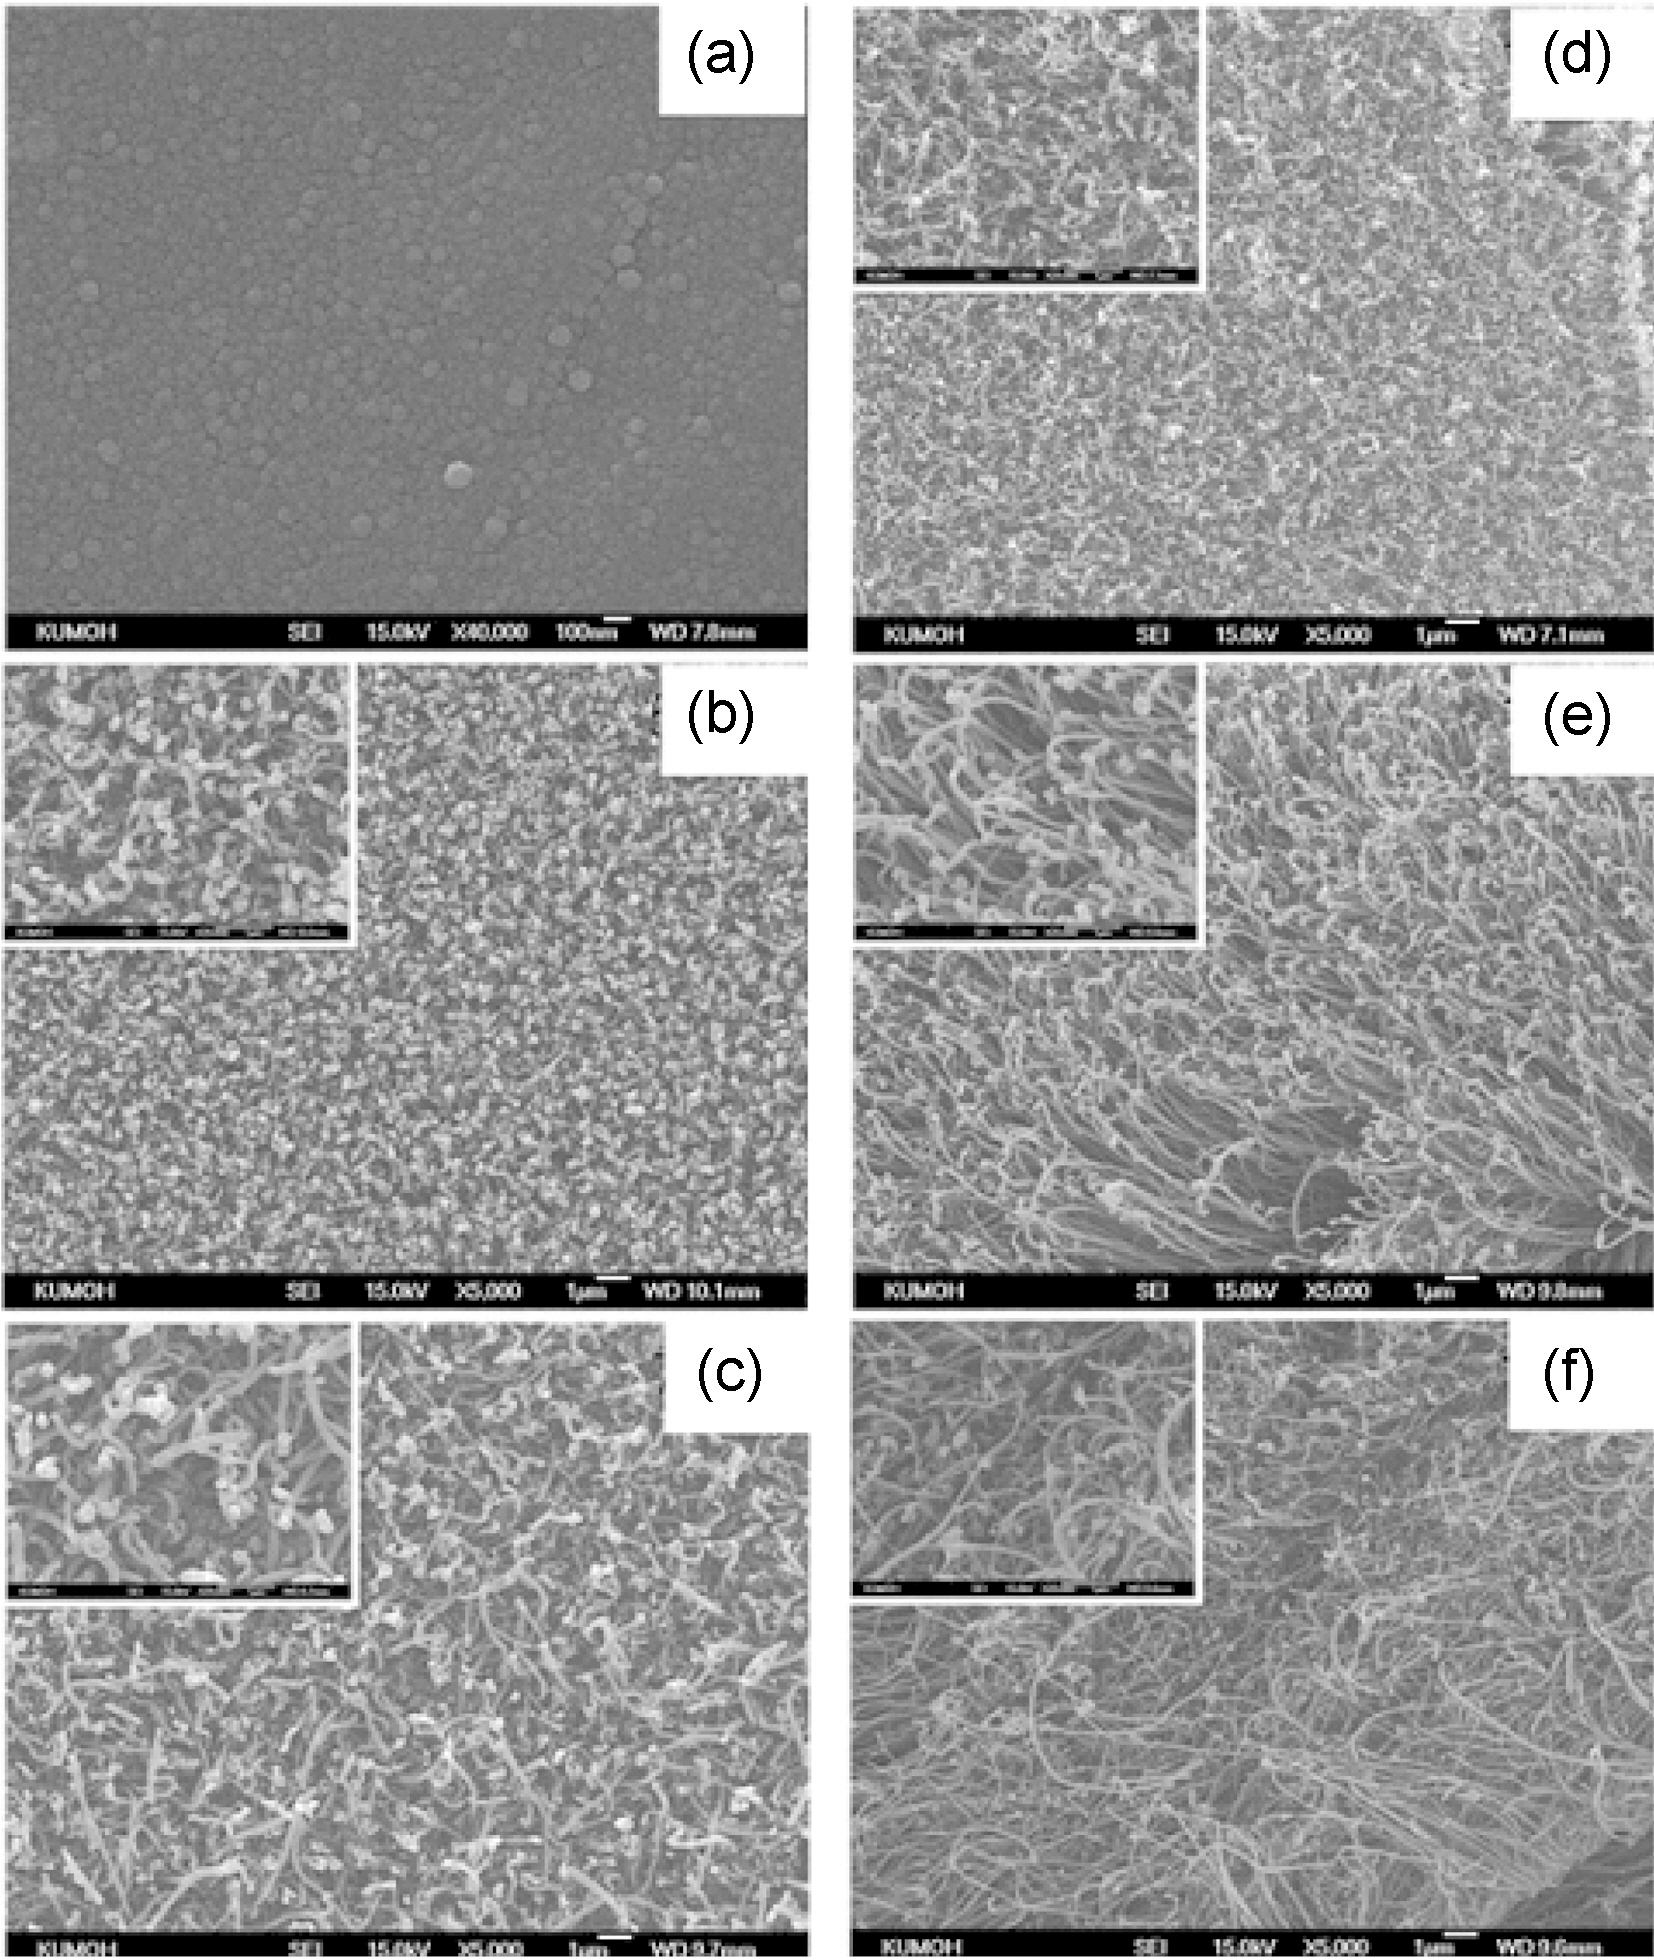 FE-SEM images of carbon nanotubes grown on 20 nm Ni catalyst at 300℃ for 10 min with an applied voltage of (a) 0 V (b) 50 V (c) 70 V (d) 100 V (e) 125 V and (f) 150 V (the insets are magnified images).